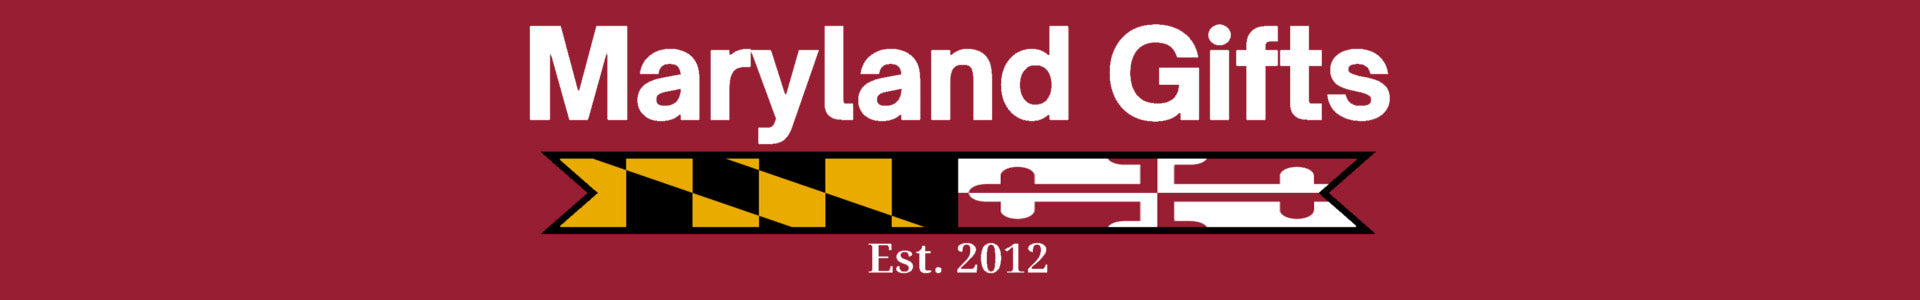 Gifts and Accessories | Shop Maryland-Gifts.com